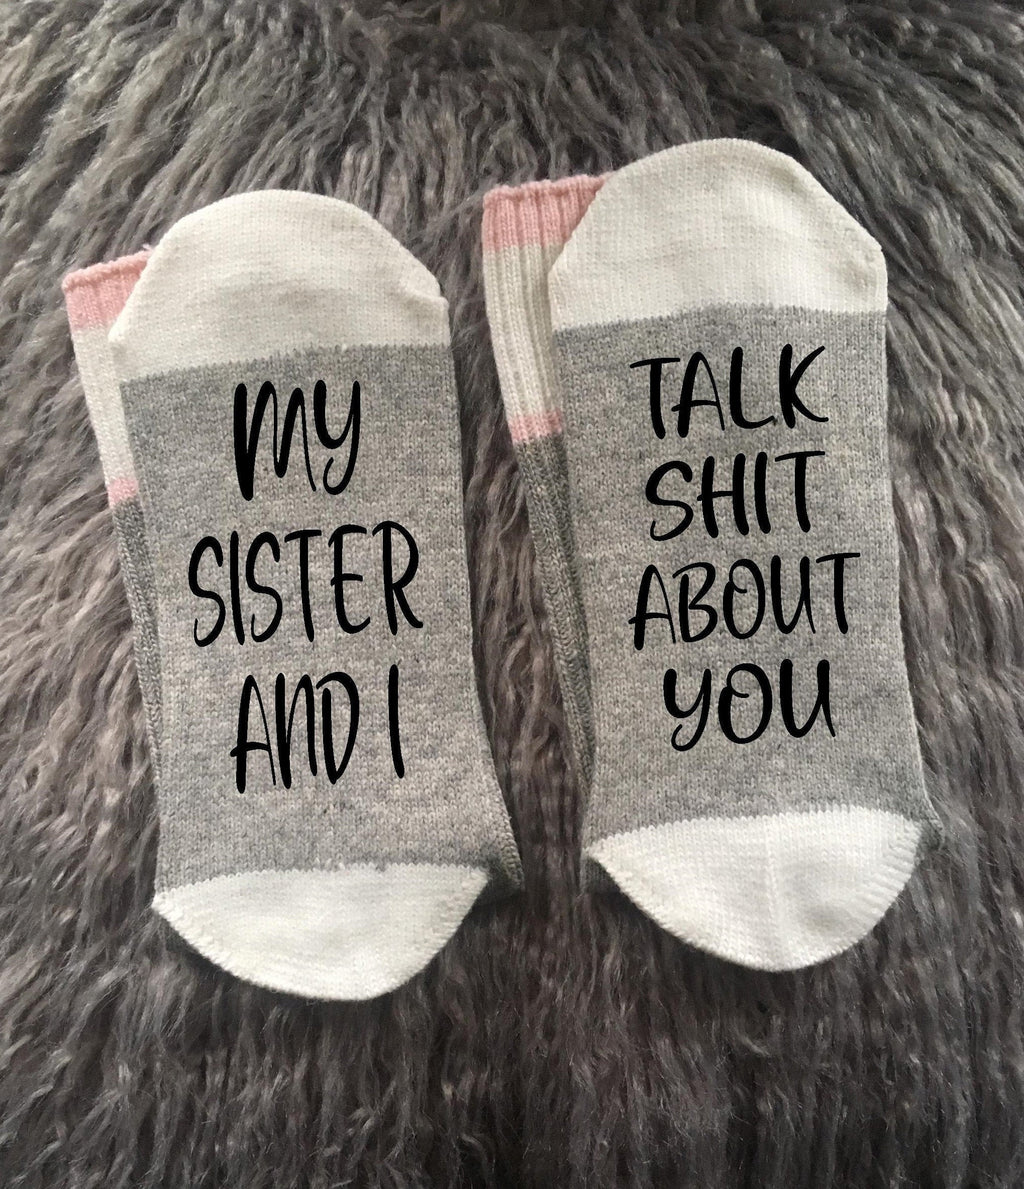 My Sister and I Talk Shit About You Socks